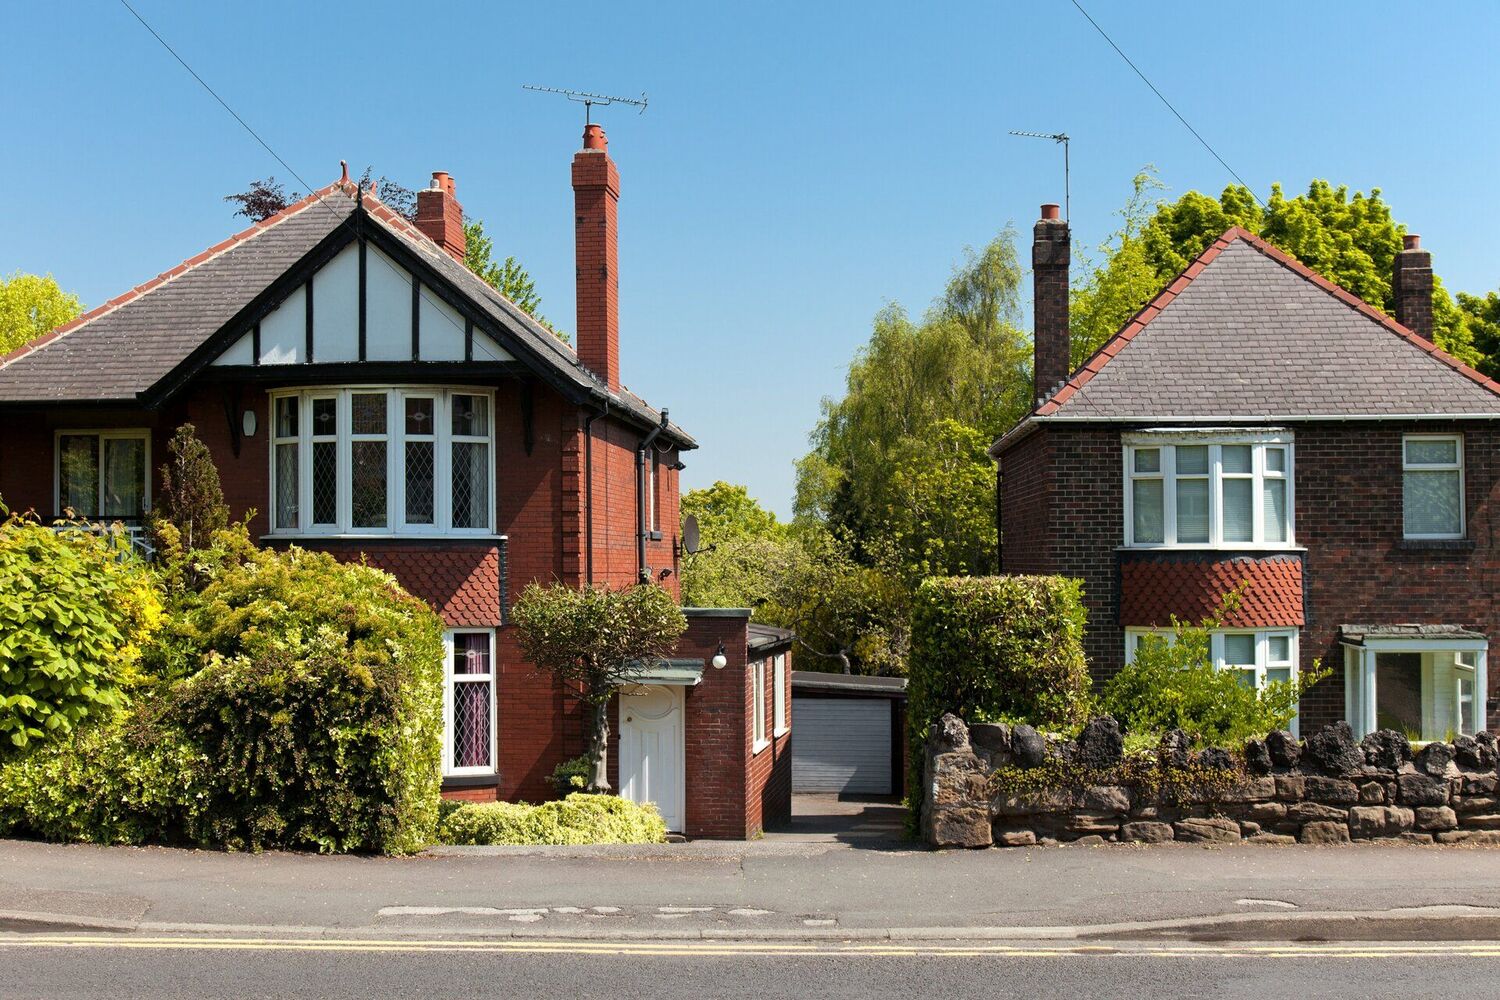 Photo of two British semi-detached houses